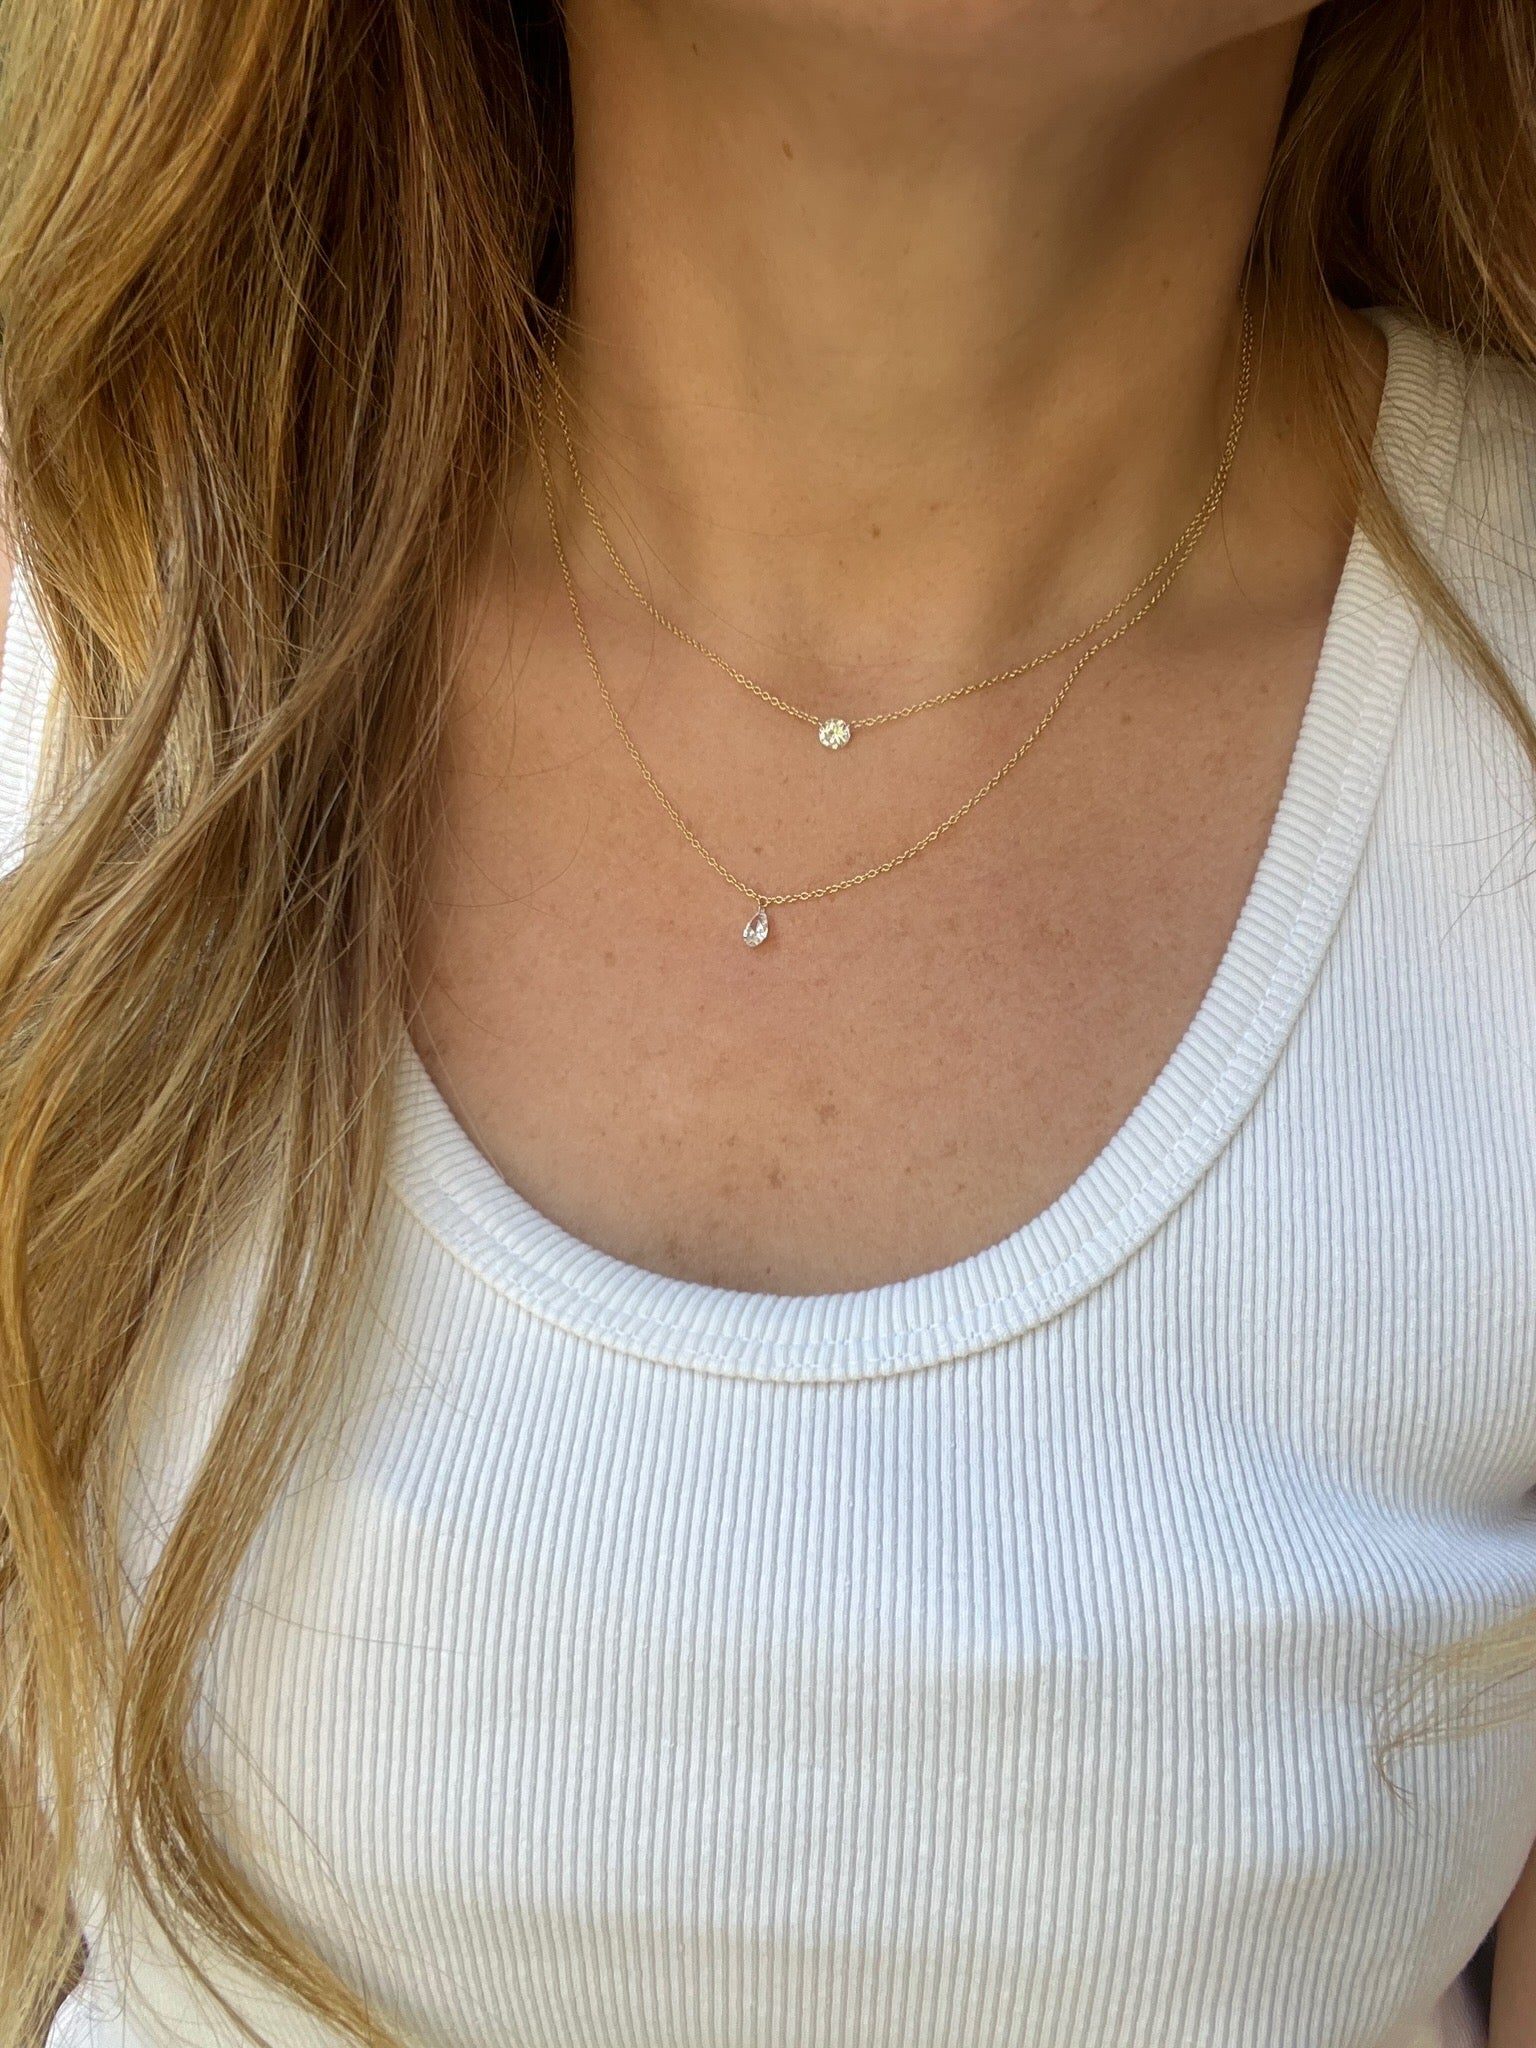 All About Floating Diamond Necklaces